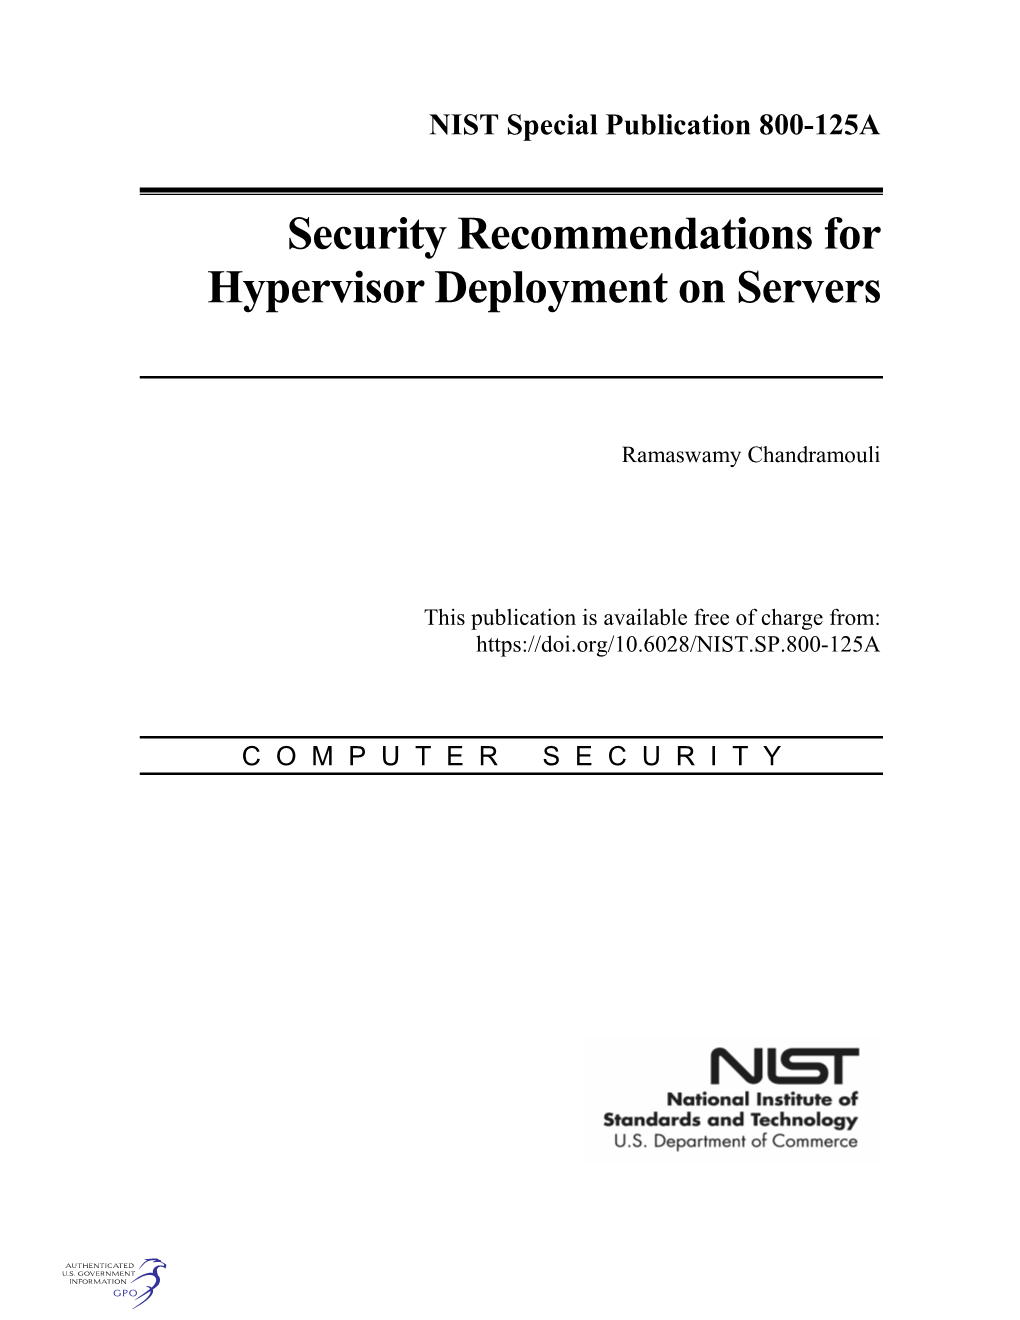 Security Recommendations for Hypervisor Deployment on Servers